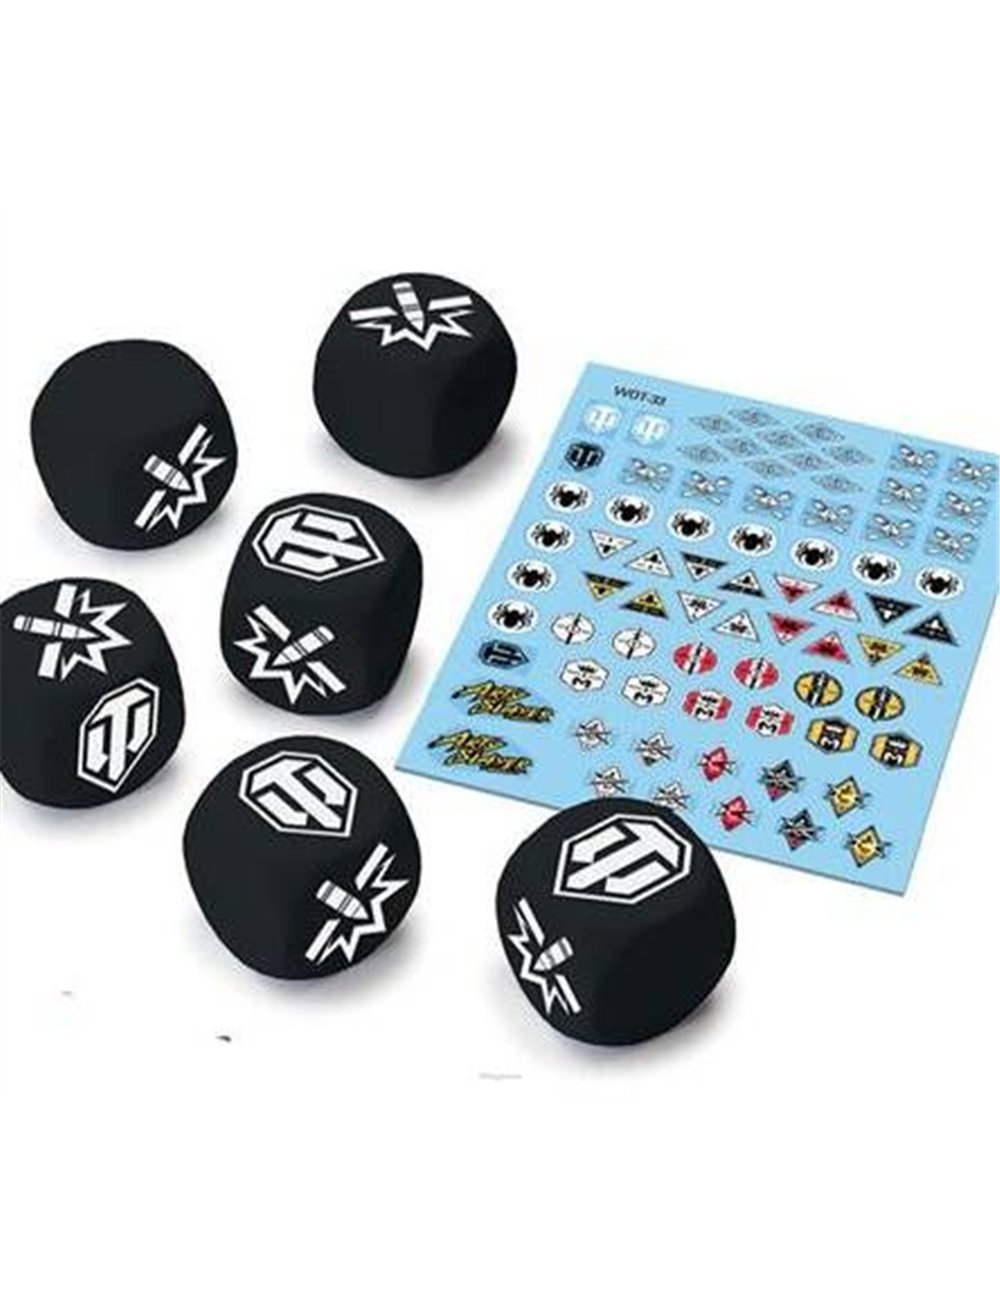 World of Tanks: Tank Ace Dice and Decals